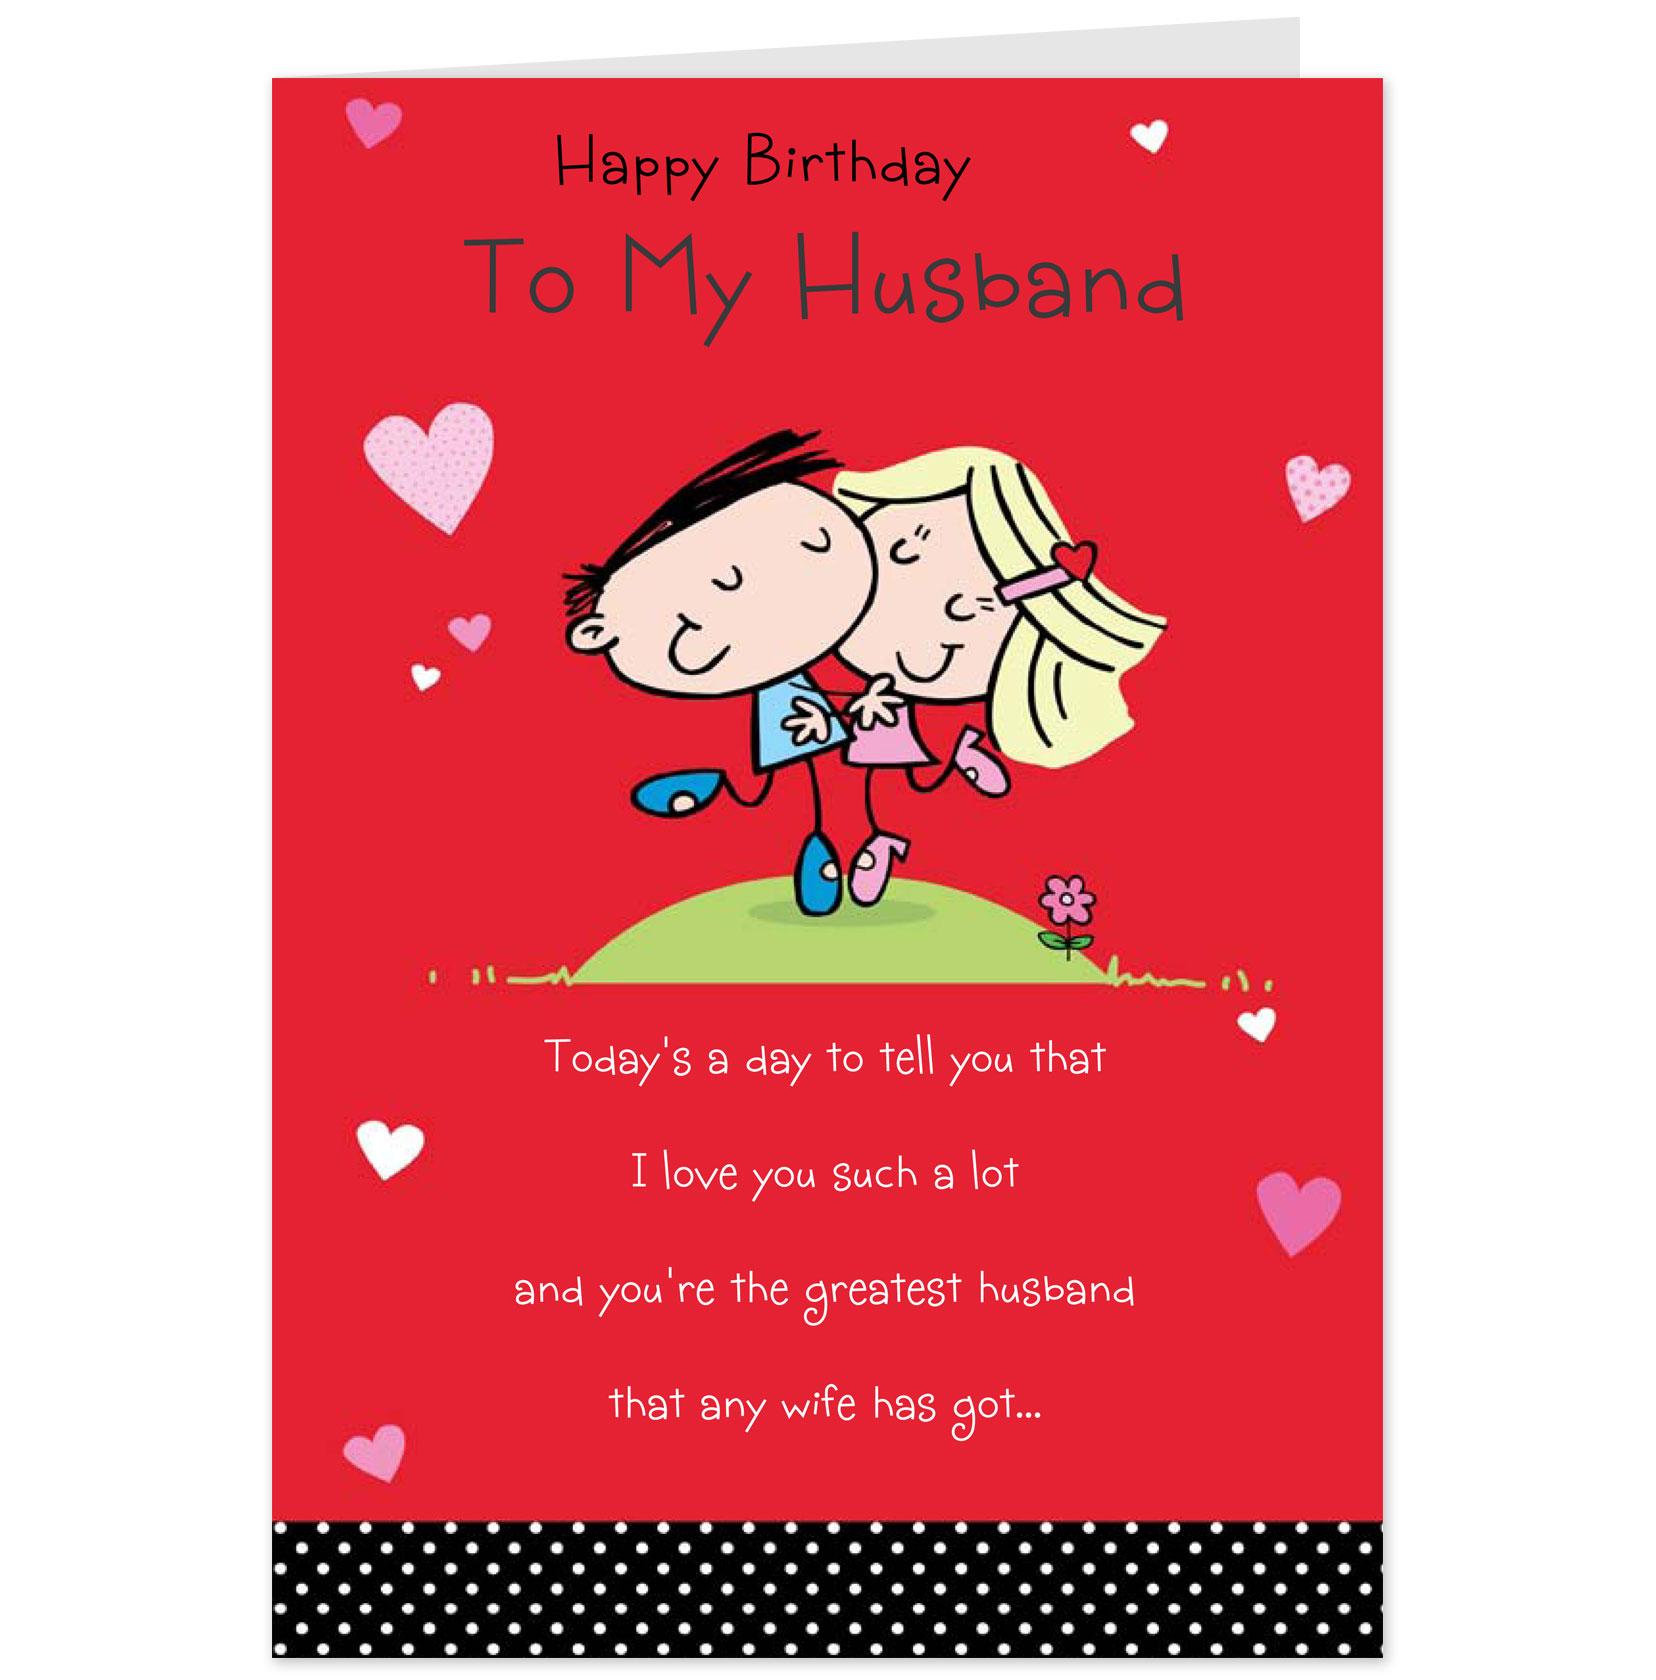 7-best-images-of-husband-birthday-greetings-printable-birthday-cards